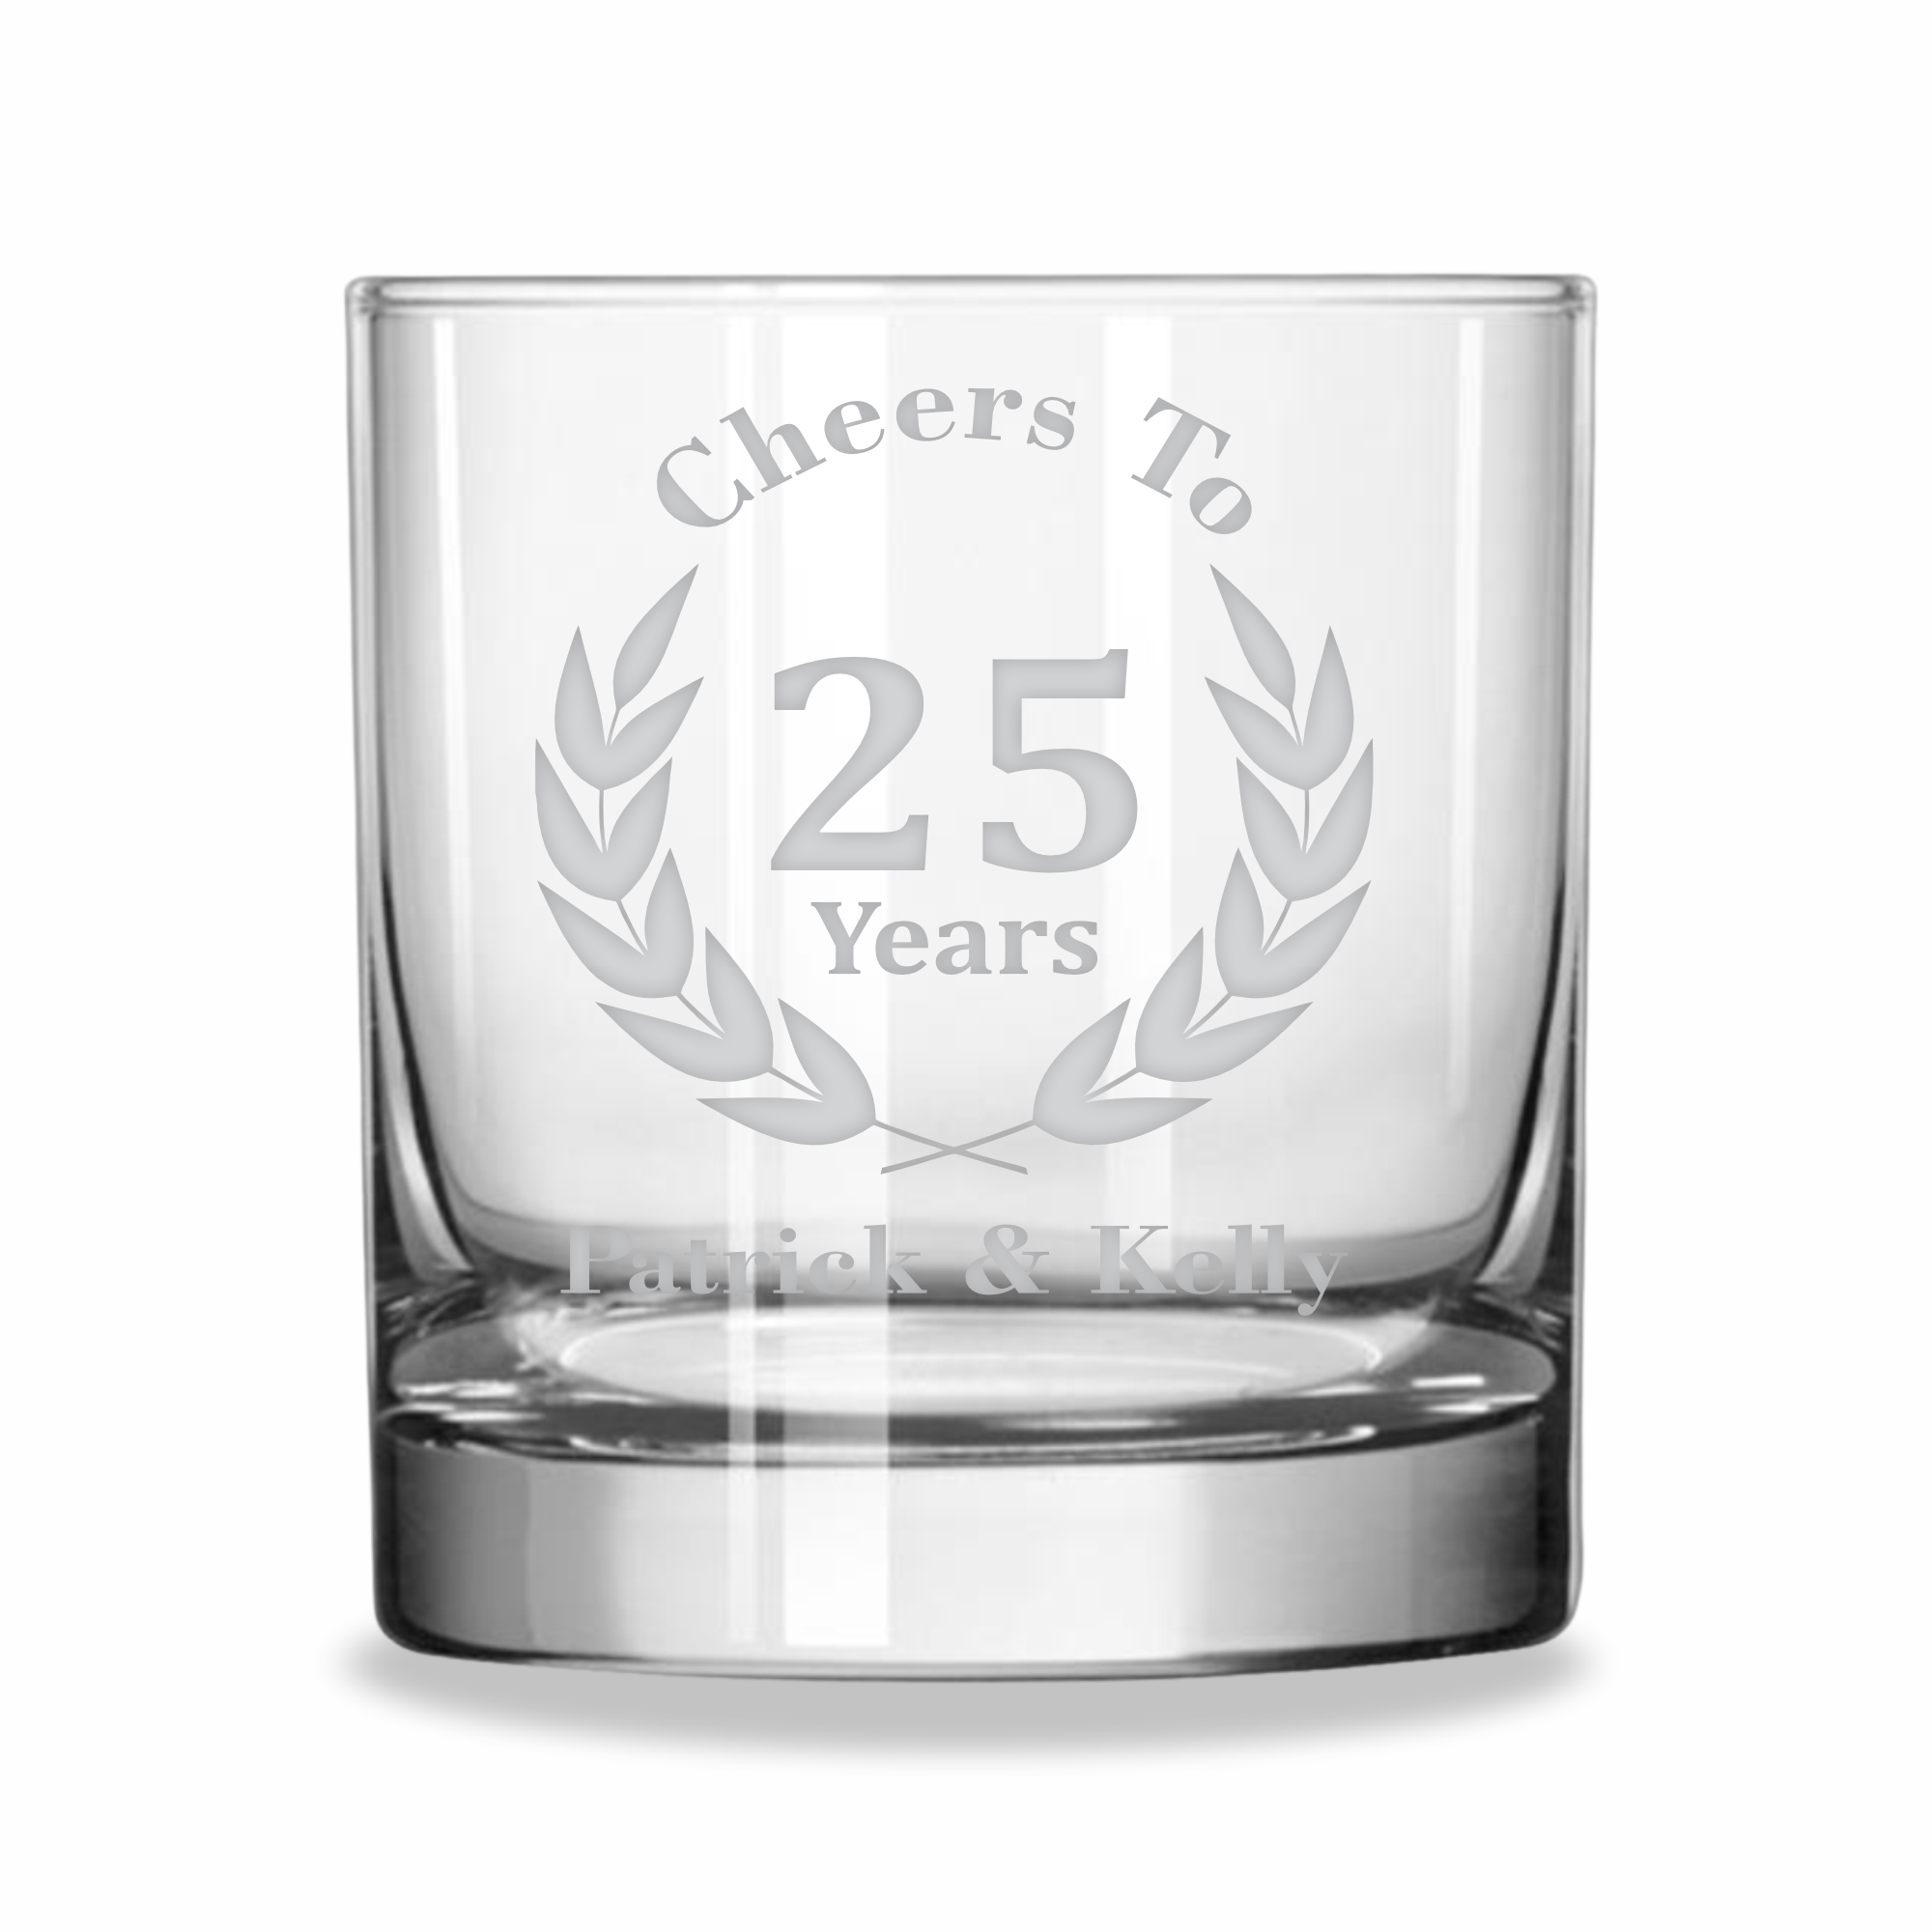 Cheers to Years | Personalized 11oz Whiskey Glass